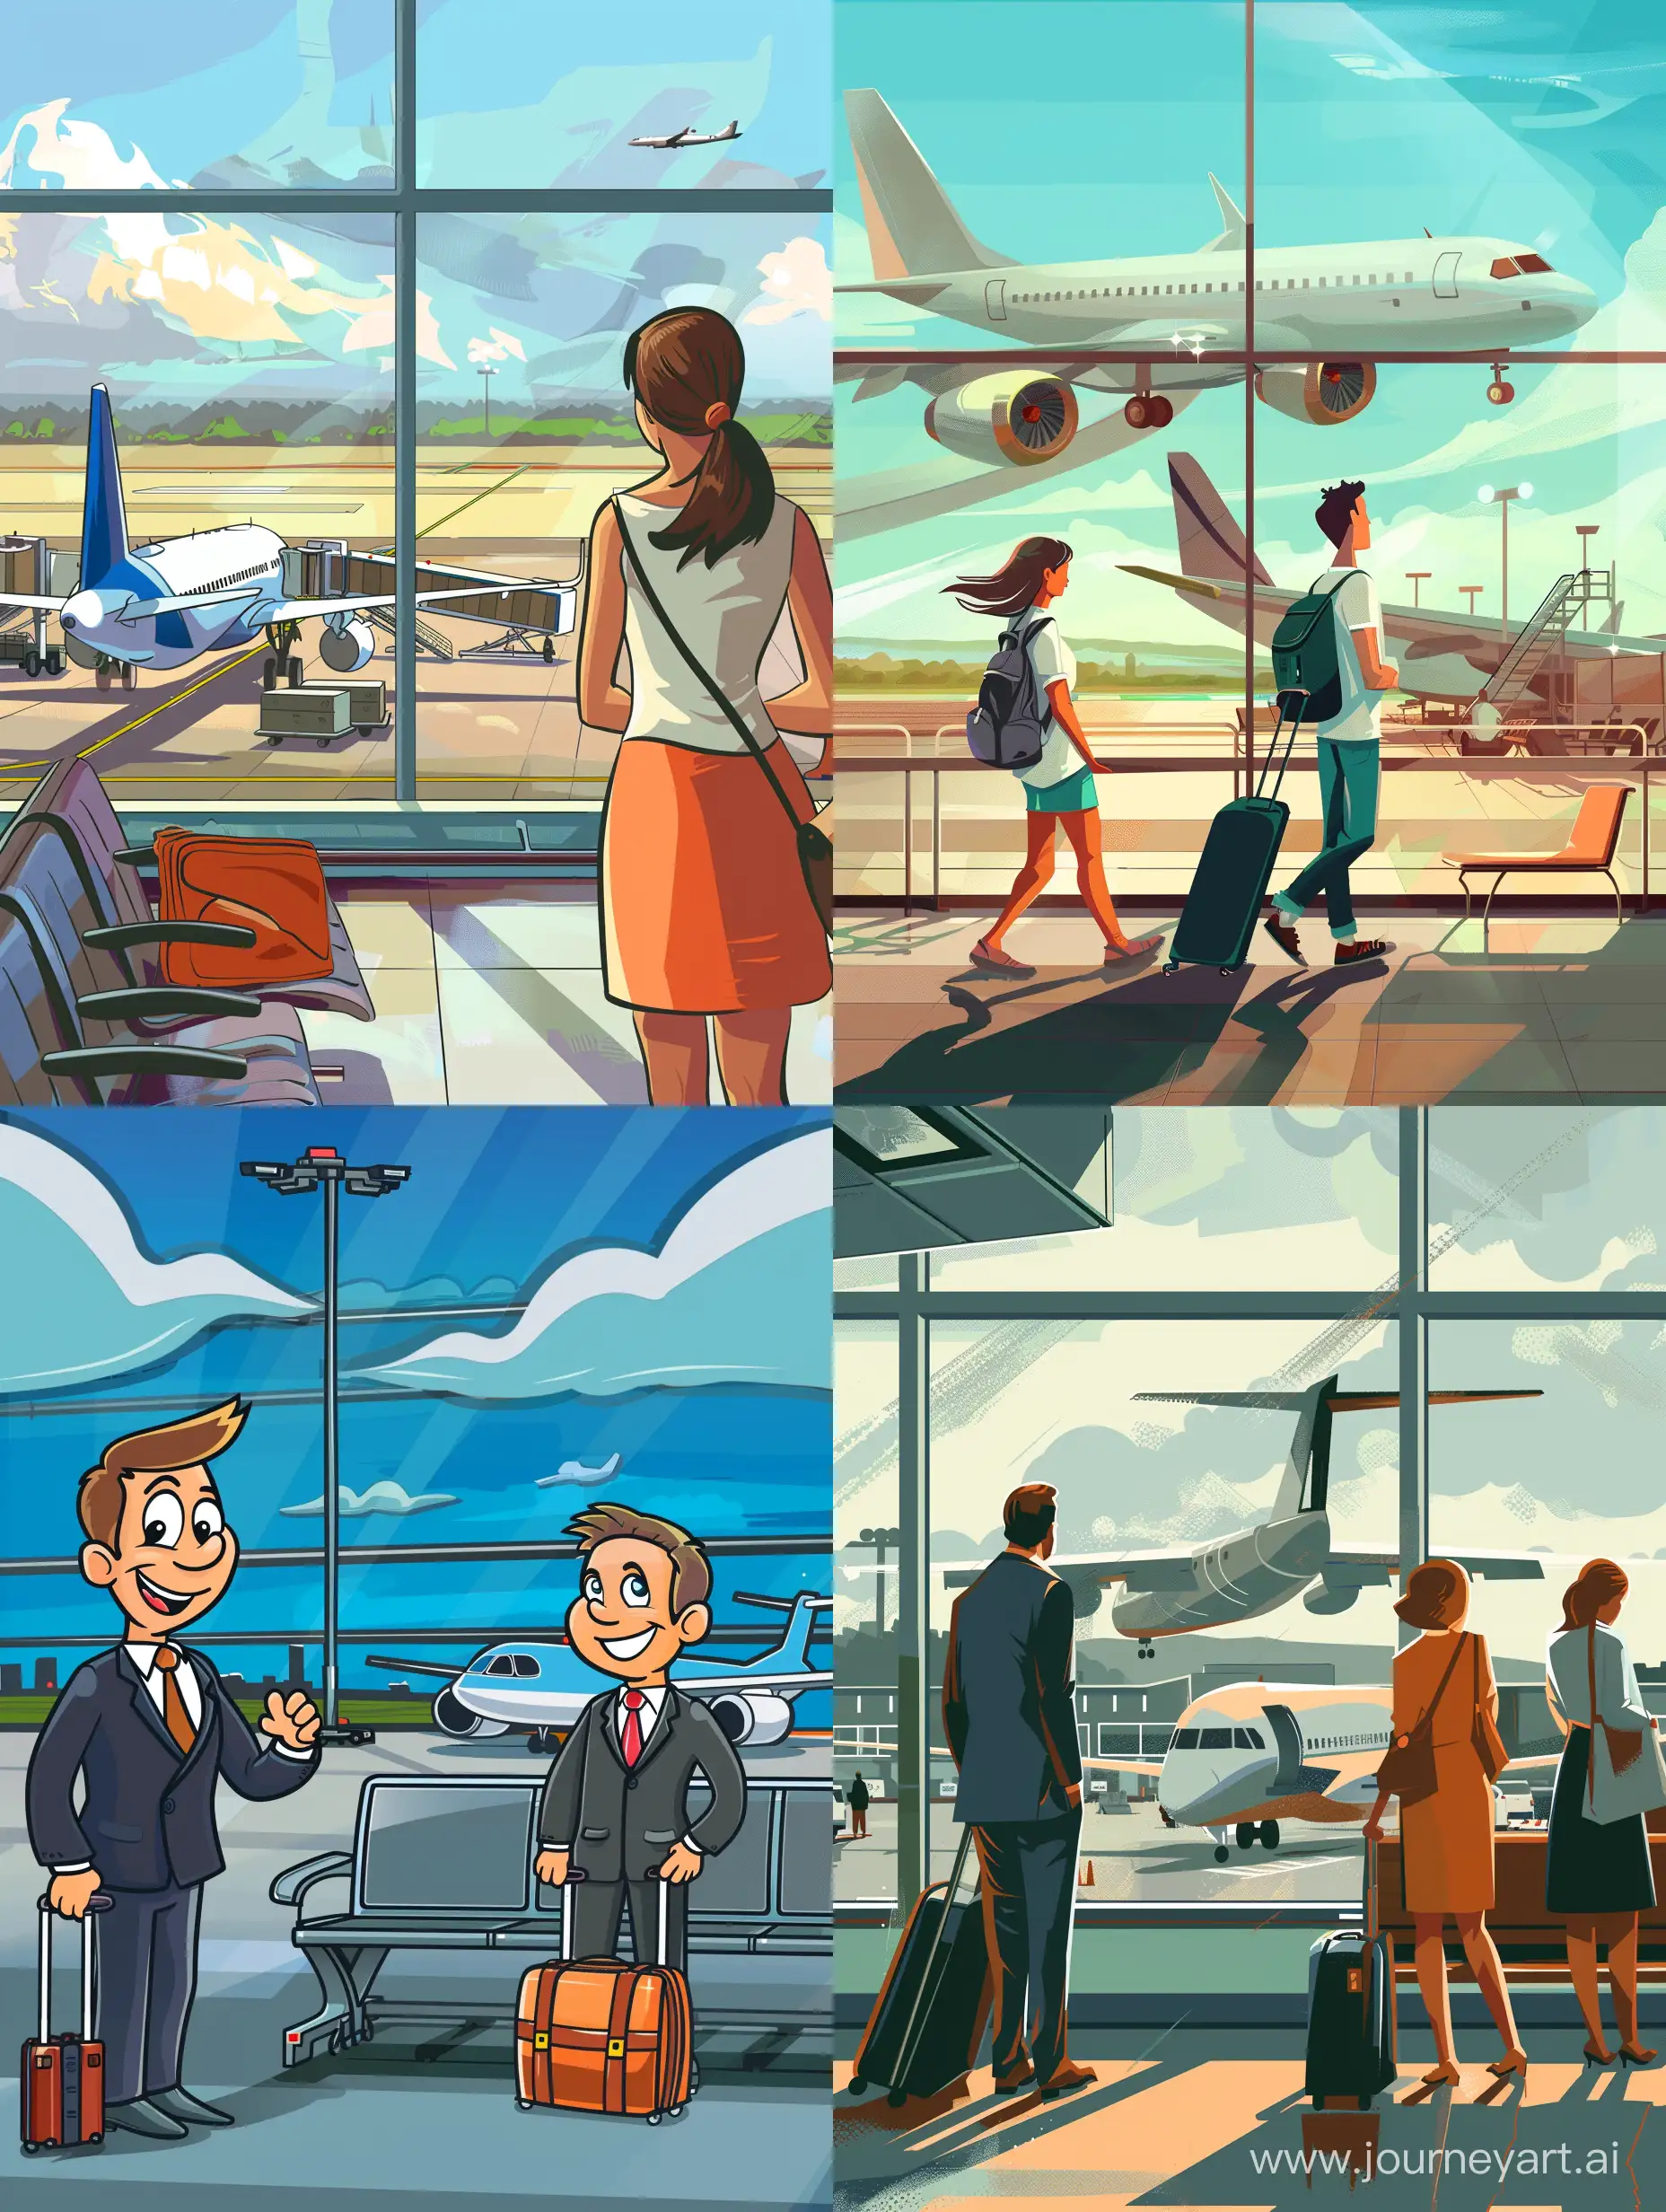 Cheerful-Cartoon-Airport-Scene-with-Vibrant-Colors-and-Playful-Characters